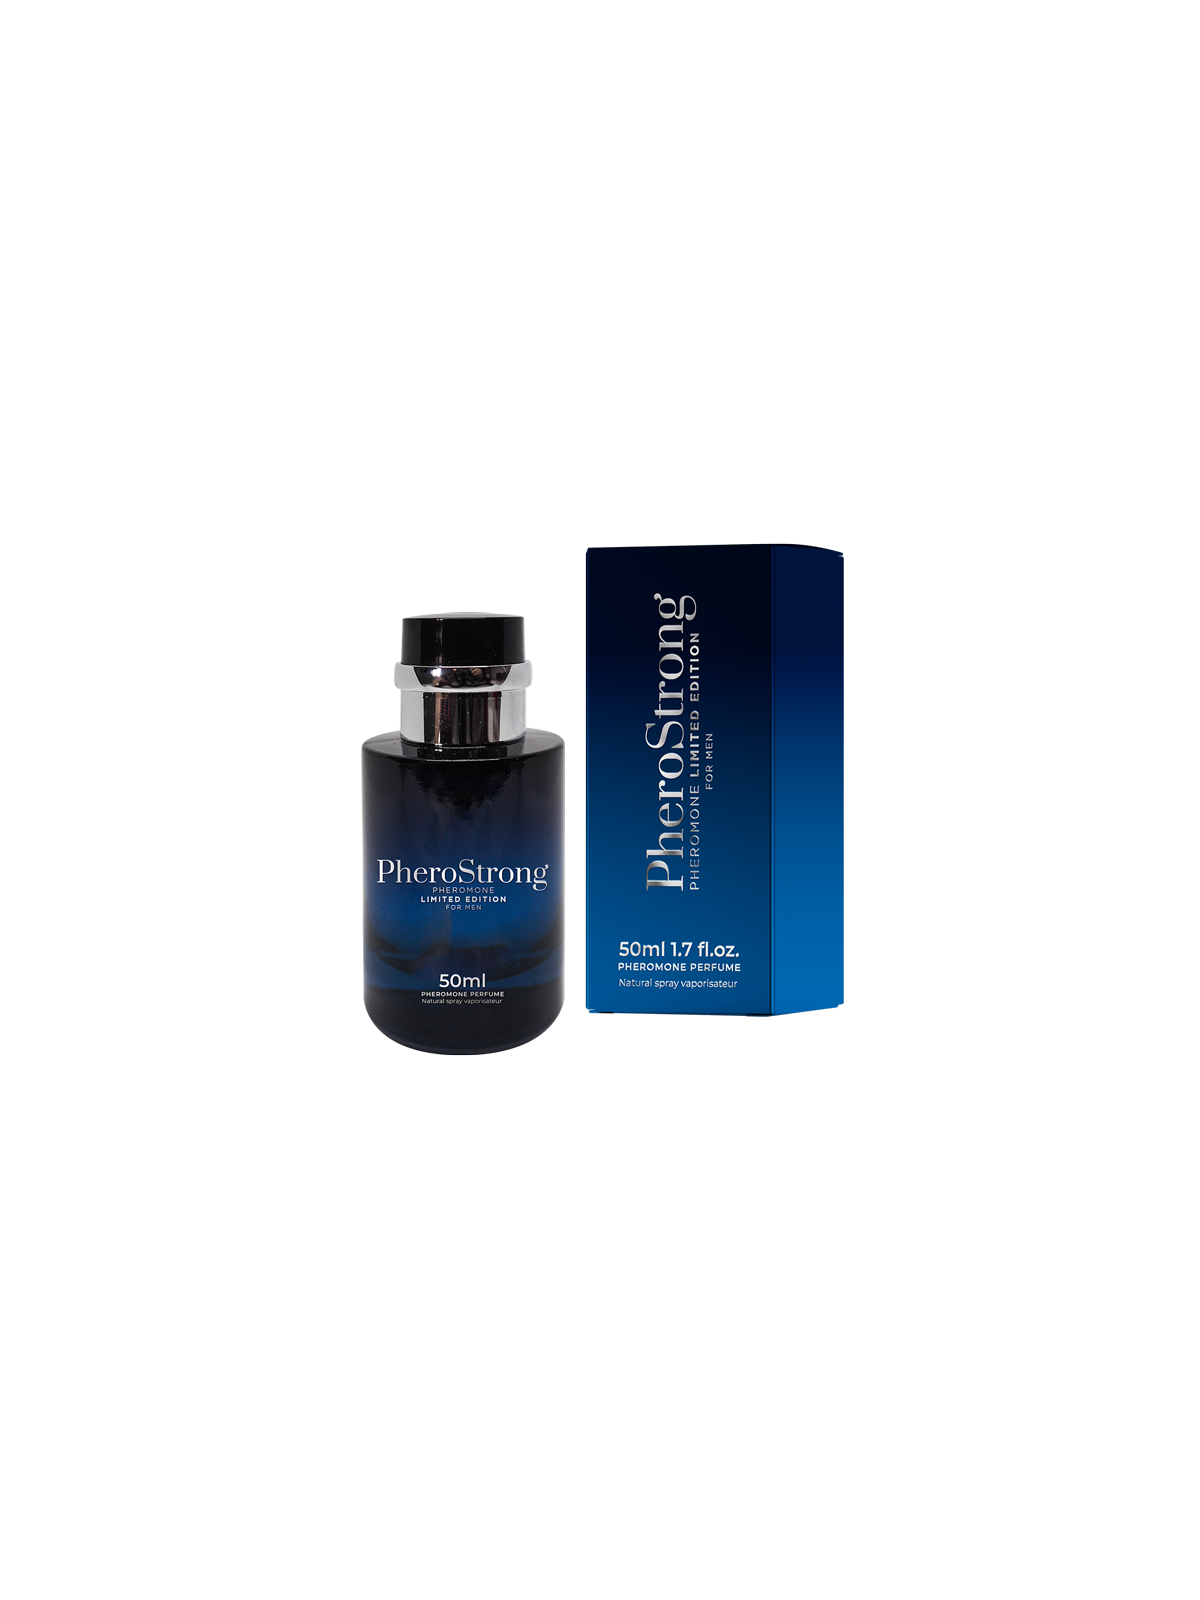 PheroStrong pheromone Limited Edition for Men 50ml